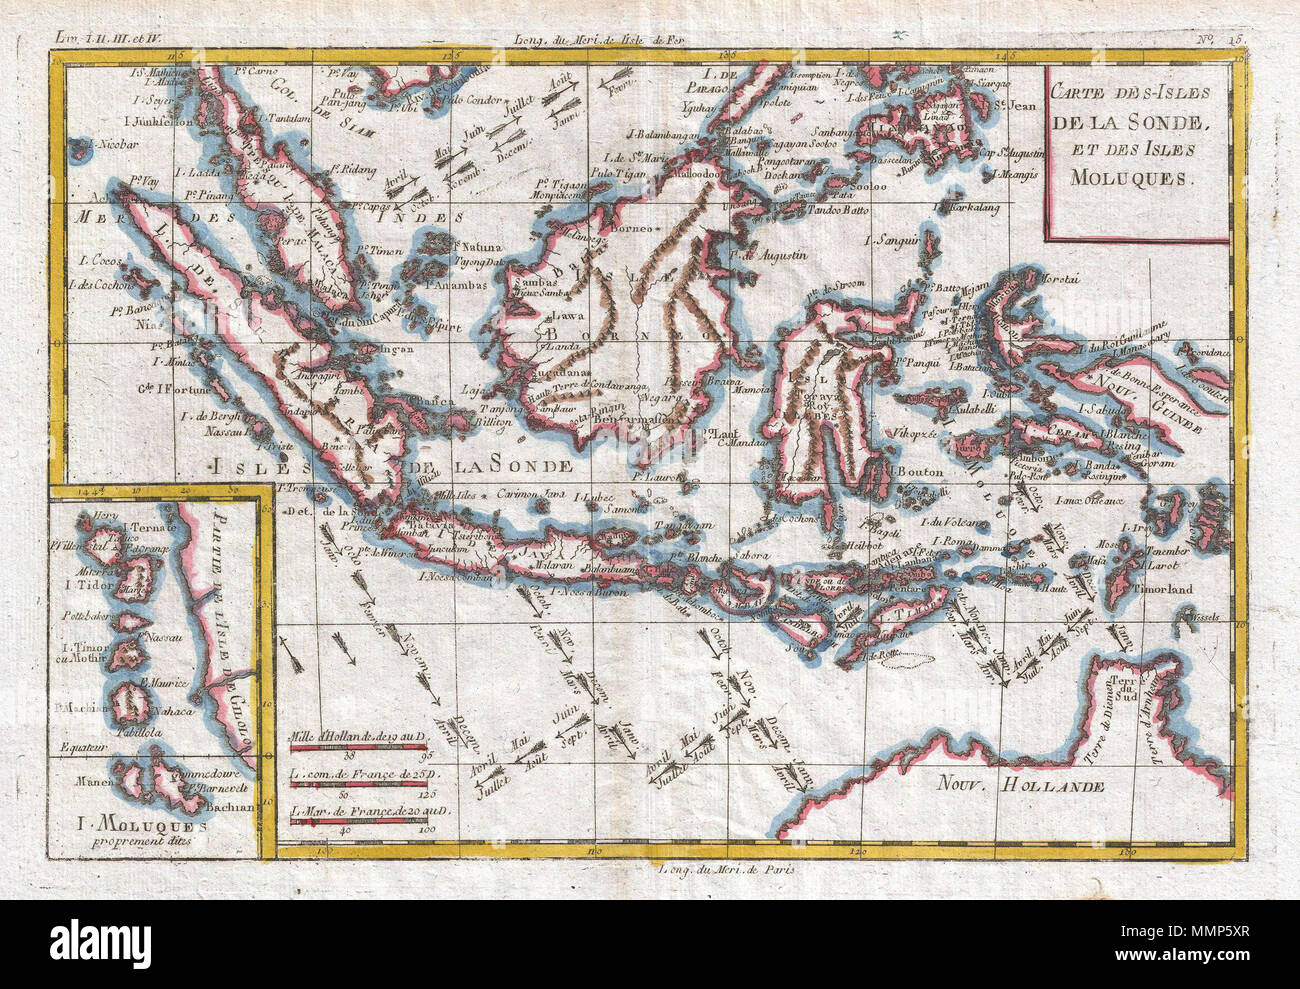 .  English: A fine example of Rigobert Bonne and Guilleme Raynal’s 1780 map of the East Indies. Covers from the Malay peninsula to Australia inclusive of Sumatra, Java, Singapore, Borneo, New Guinea, and northern Australia (Nouv. Holland). Identifies the strait of SinCapura, but mot the Island of Singapore. The southern shores of New Guinea are only partially explored and here have been left blank. Arrows in the seas show the important trade winds that facilitated commerce in this region from the earliest antiquity. Includes detailed inset of Moluccas in lower left quadrant. Highly detailed, s Stock Photo